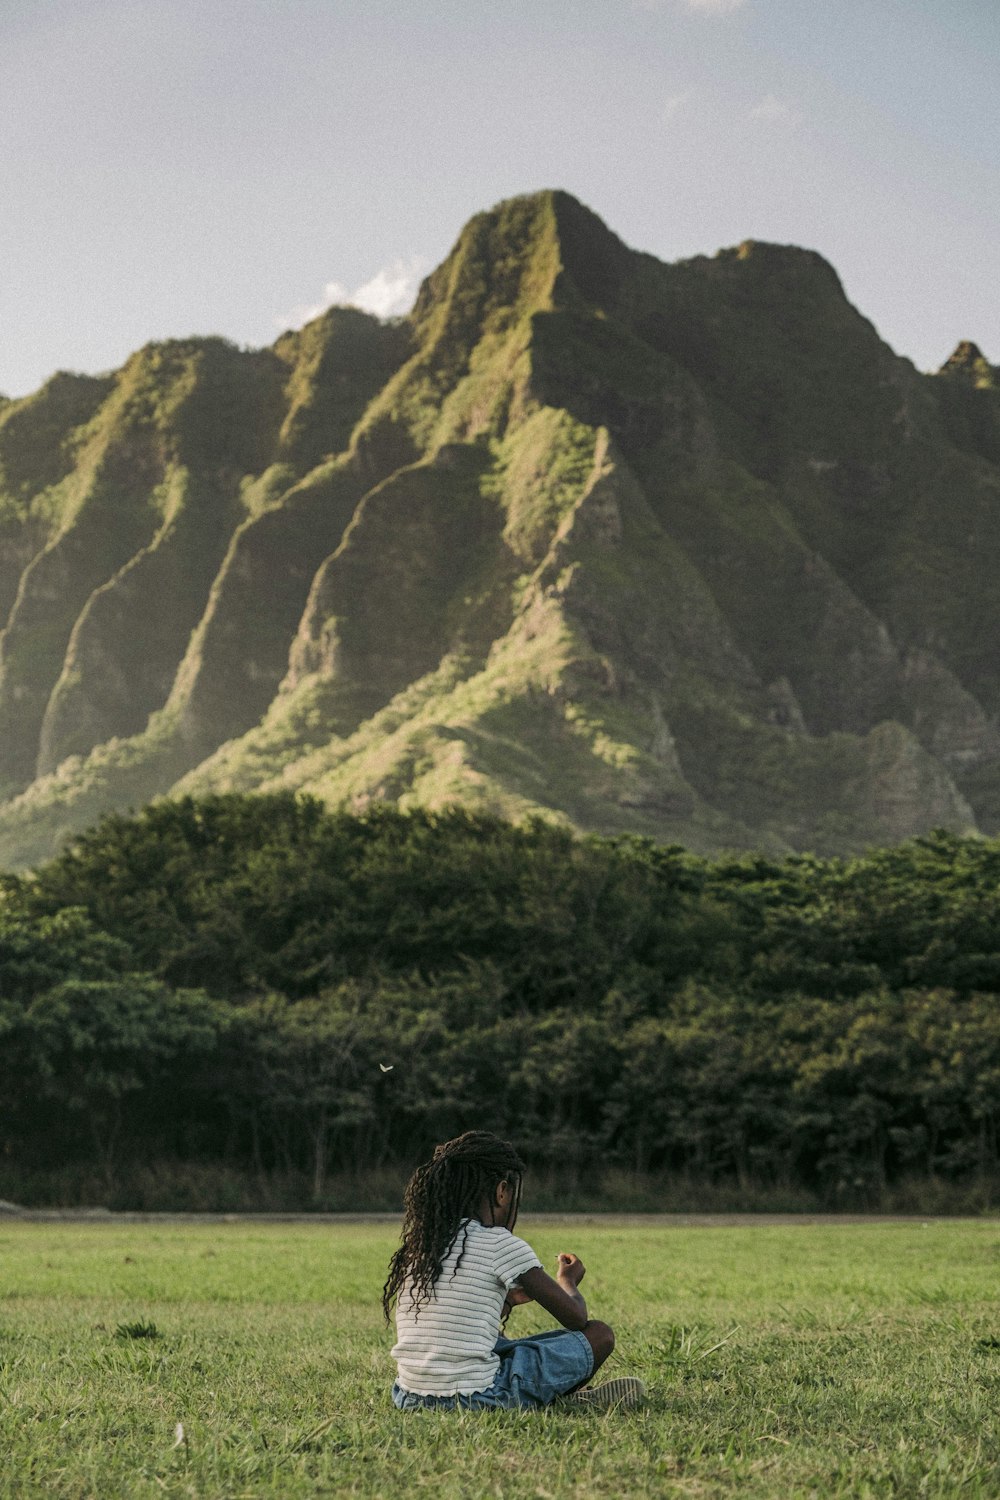 a person sitting in a grassy field with a mountain in the background